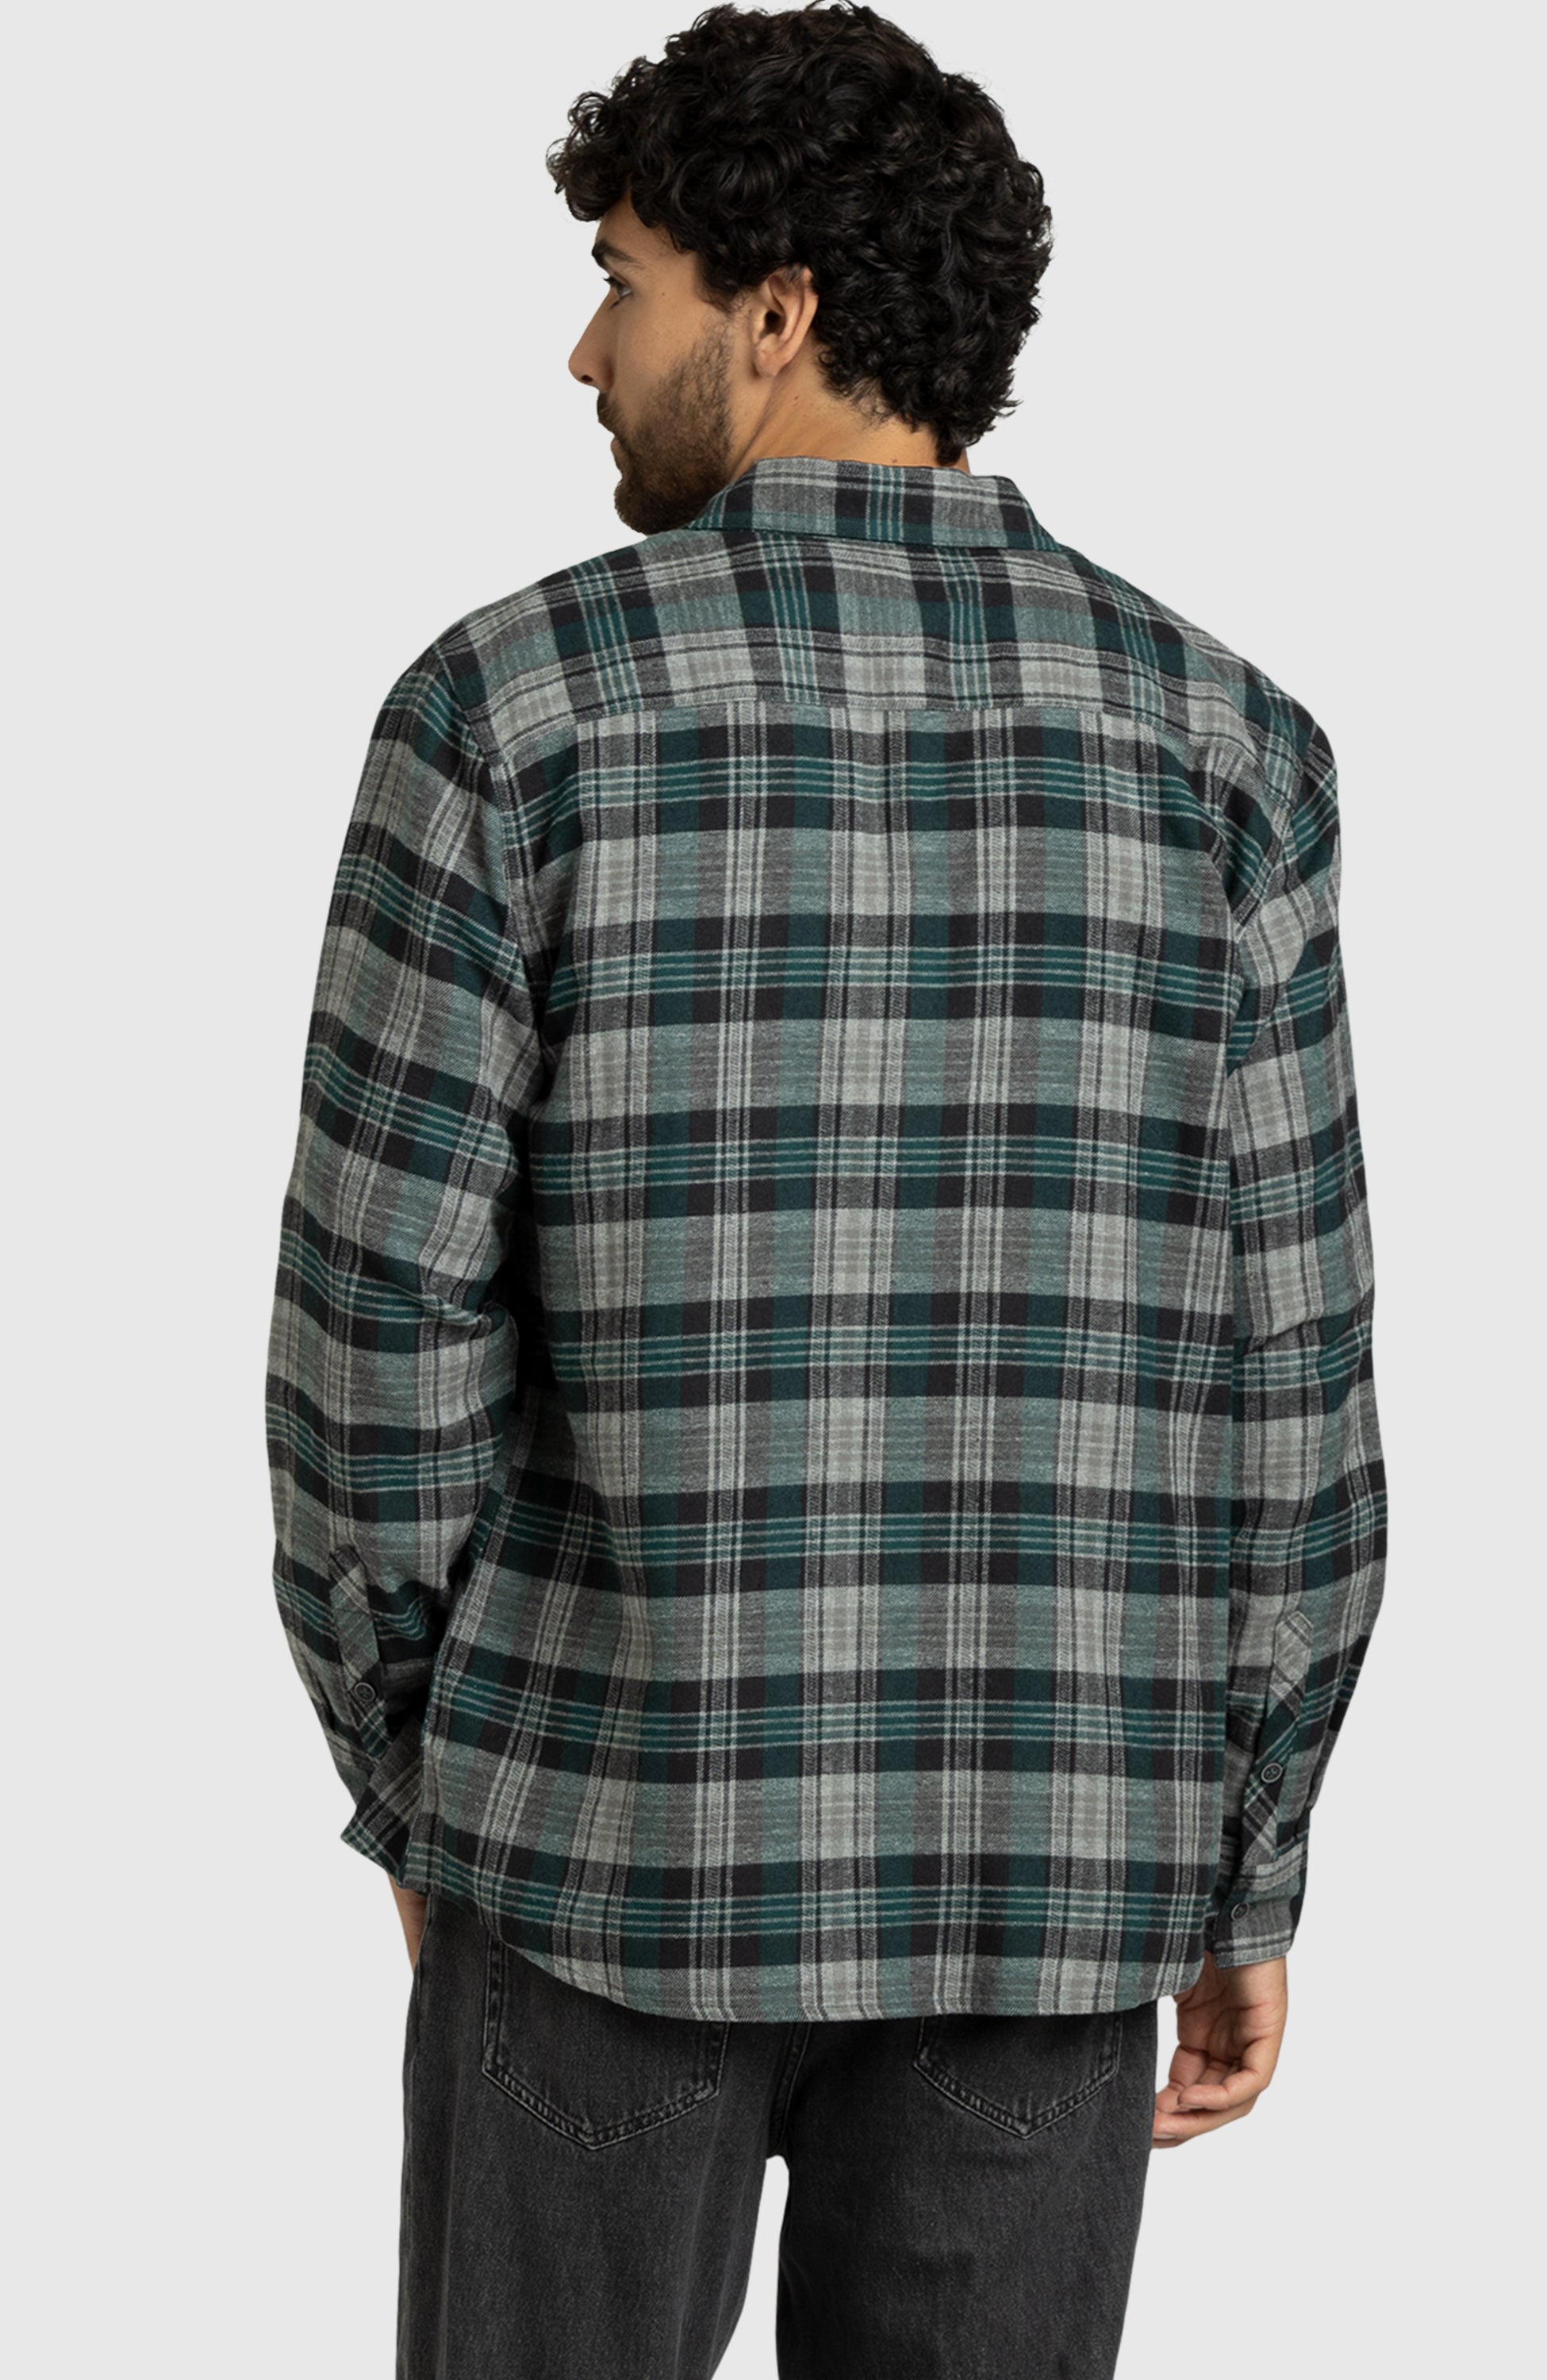 Dusty Olive Plaid Shirt for Men | Boston Traders M / Dusty Olive